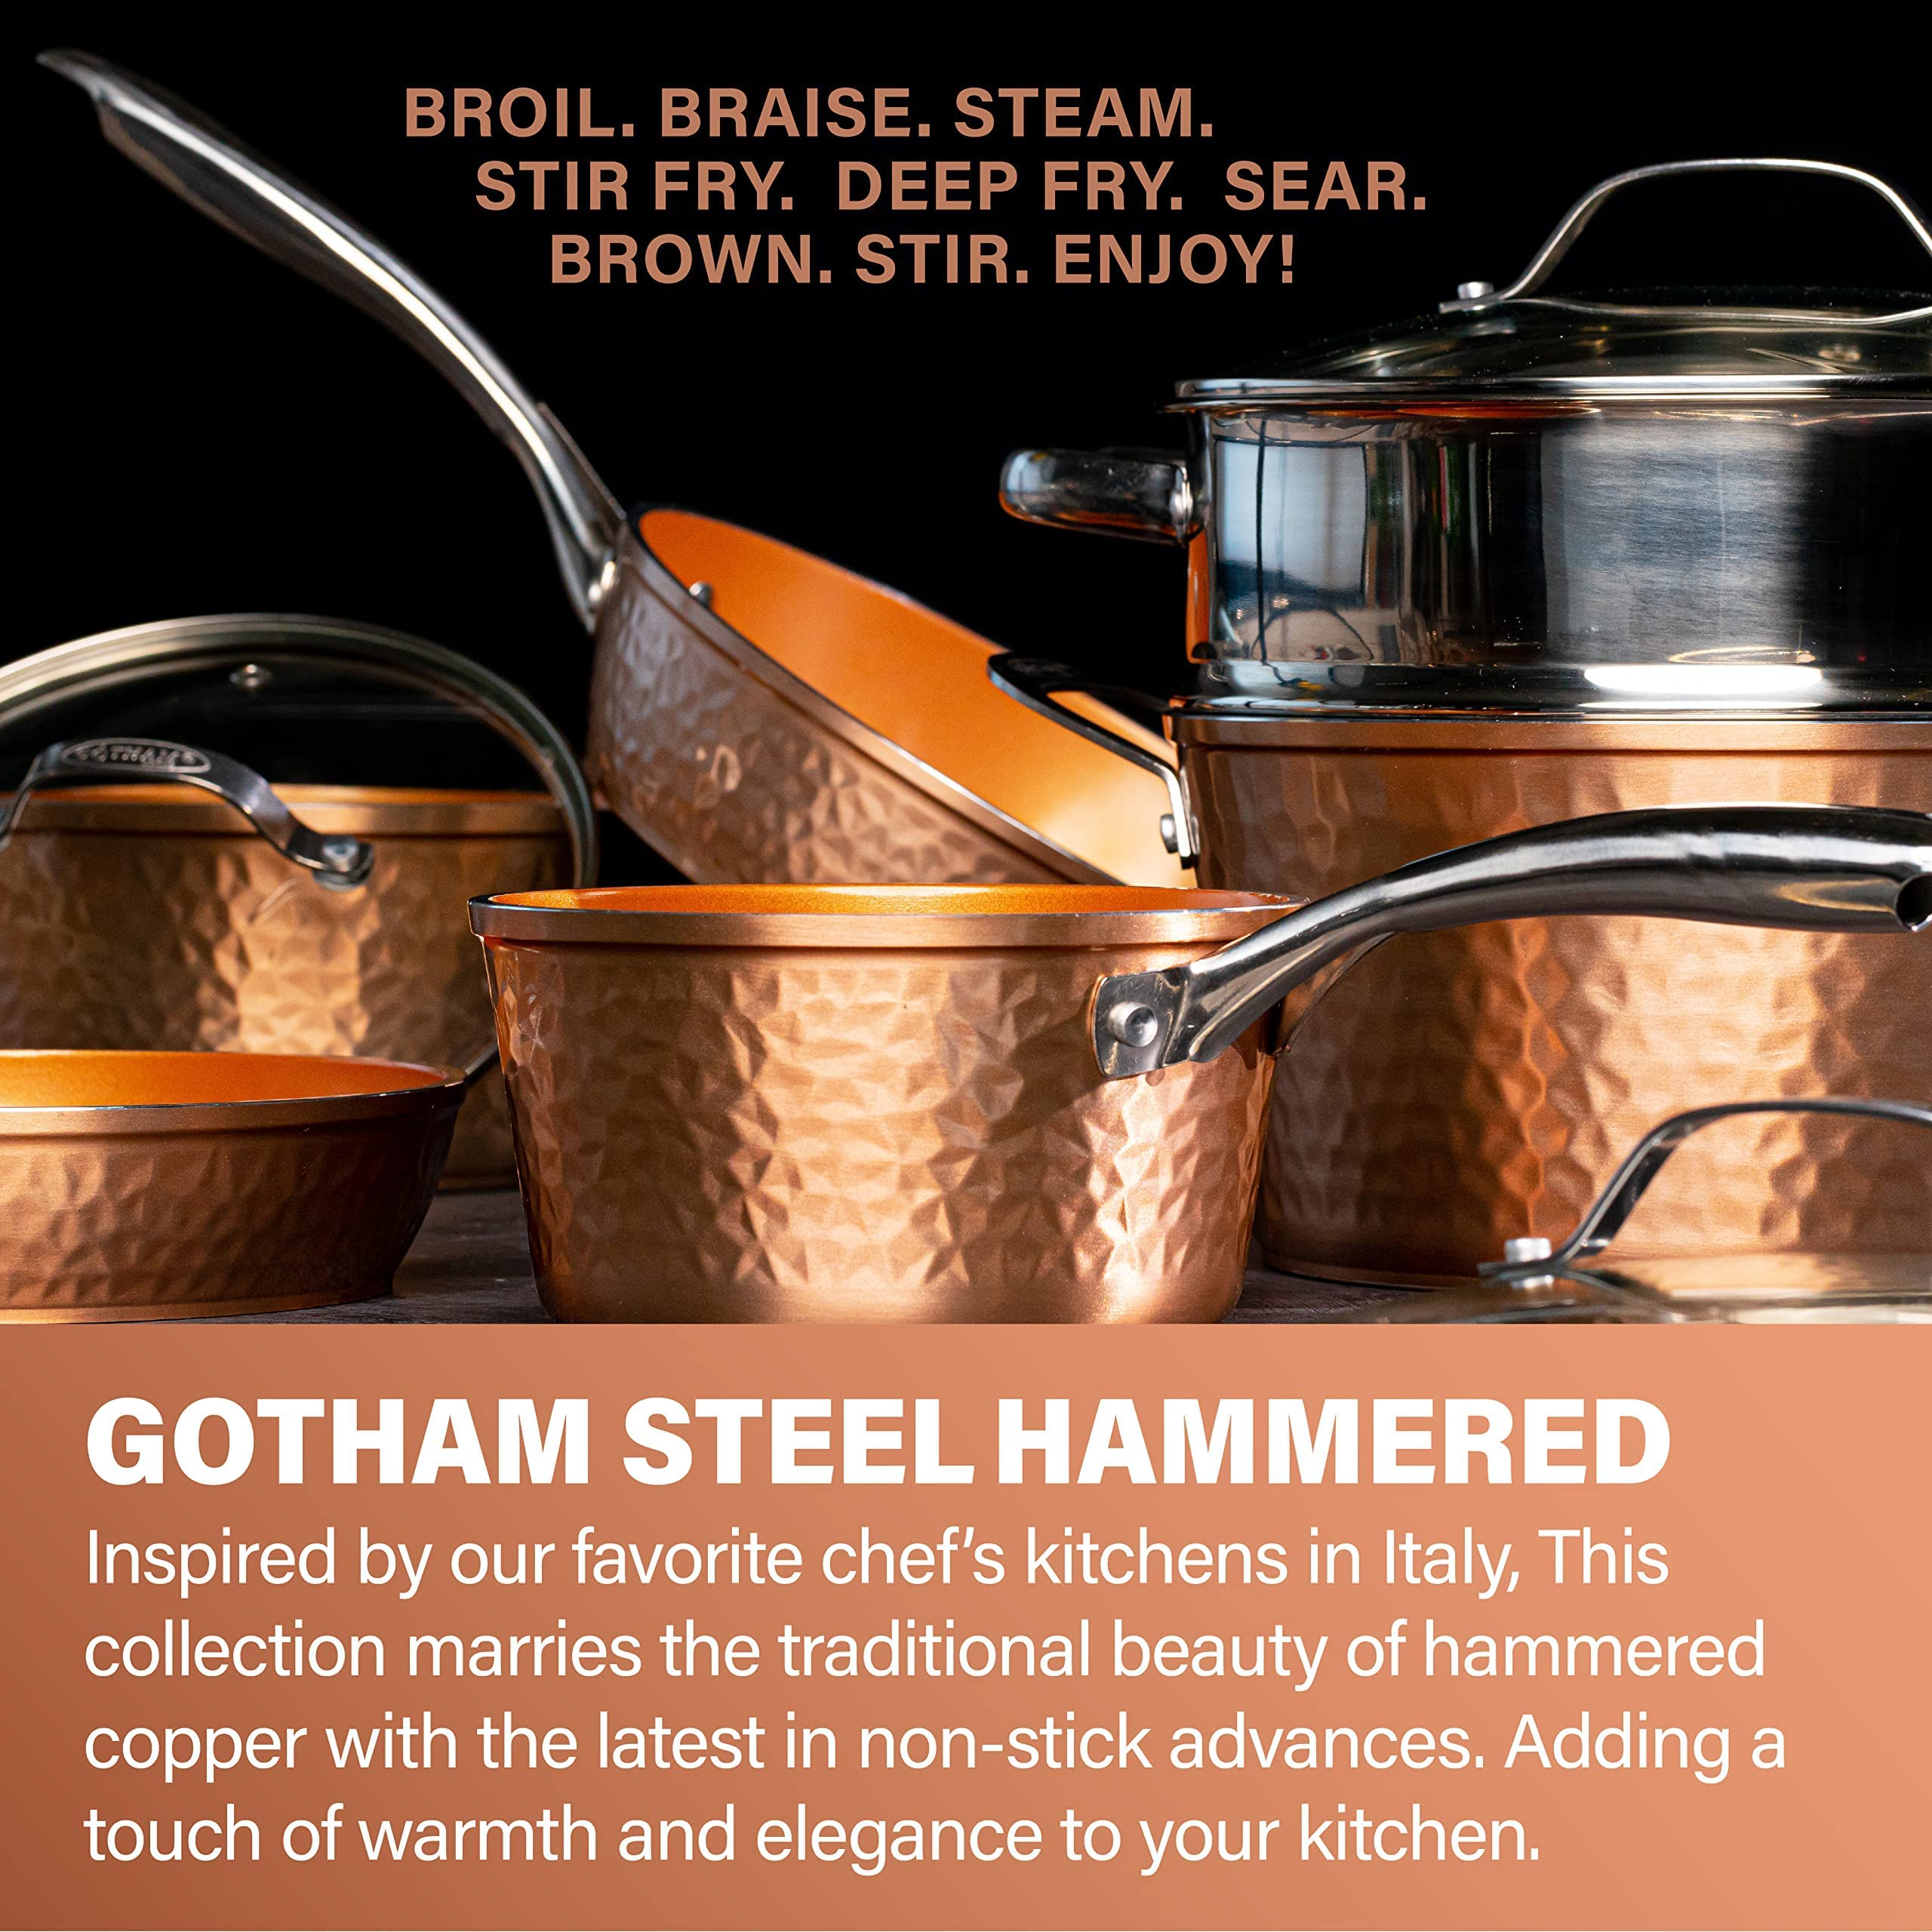 Gotham Steel 12” Nonstick Fry Pan with Lid – Hammered Copper Collection, Premium Aluminum Cookware with Stainless Steel Handles, Induction Plate for Even Heating, Dishwasher & Oven Safe, Large